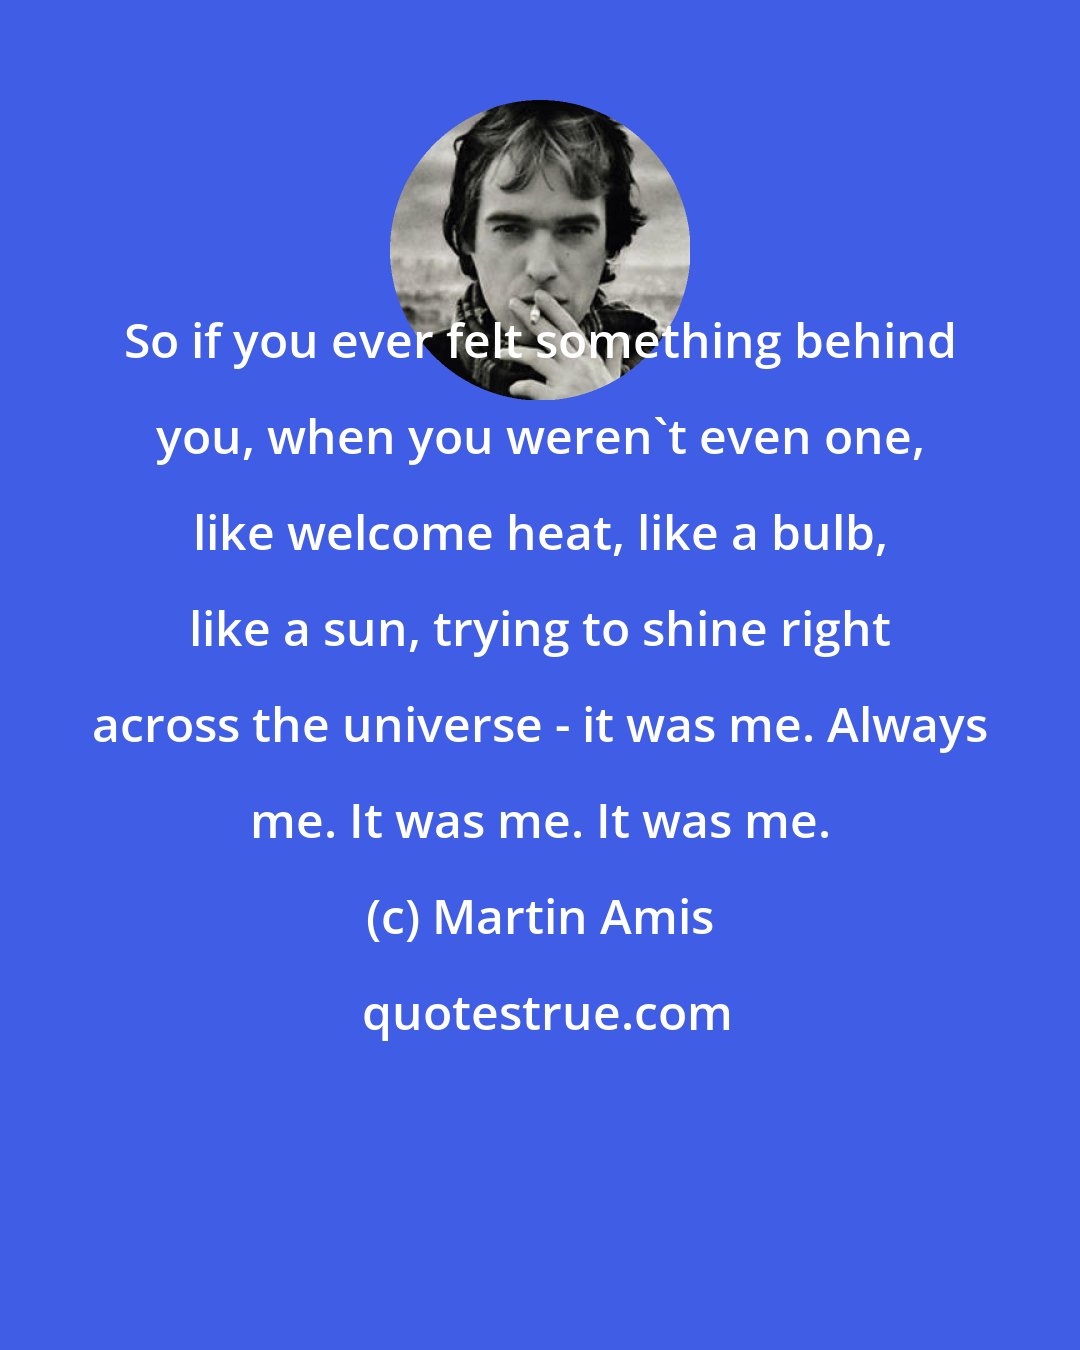 Martin Amis: So if you ever felt something behind you, when you weren't even one, like welcome heat, like a bulb, like a sun, trying to shine right across the universe - it was me. Always me. It was me. It was me.